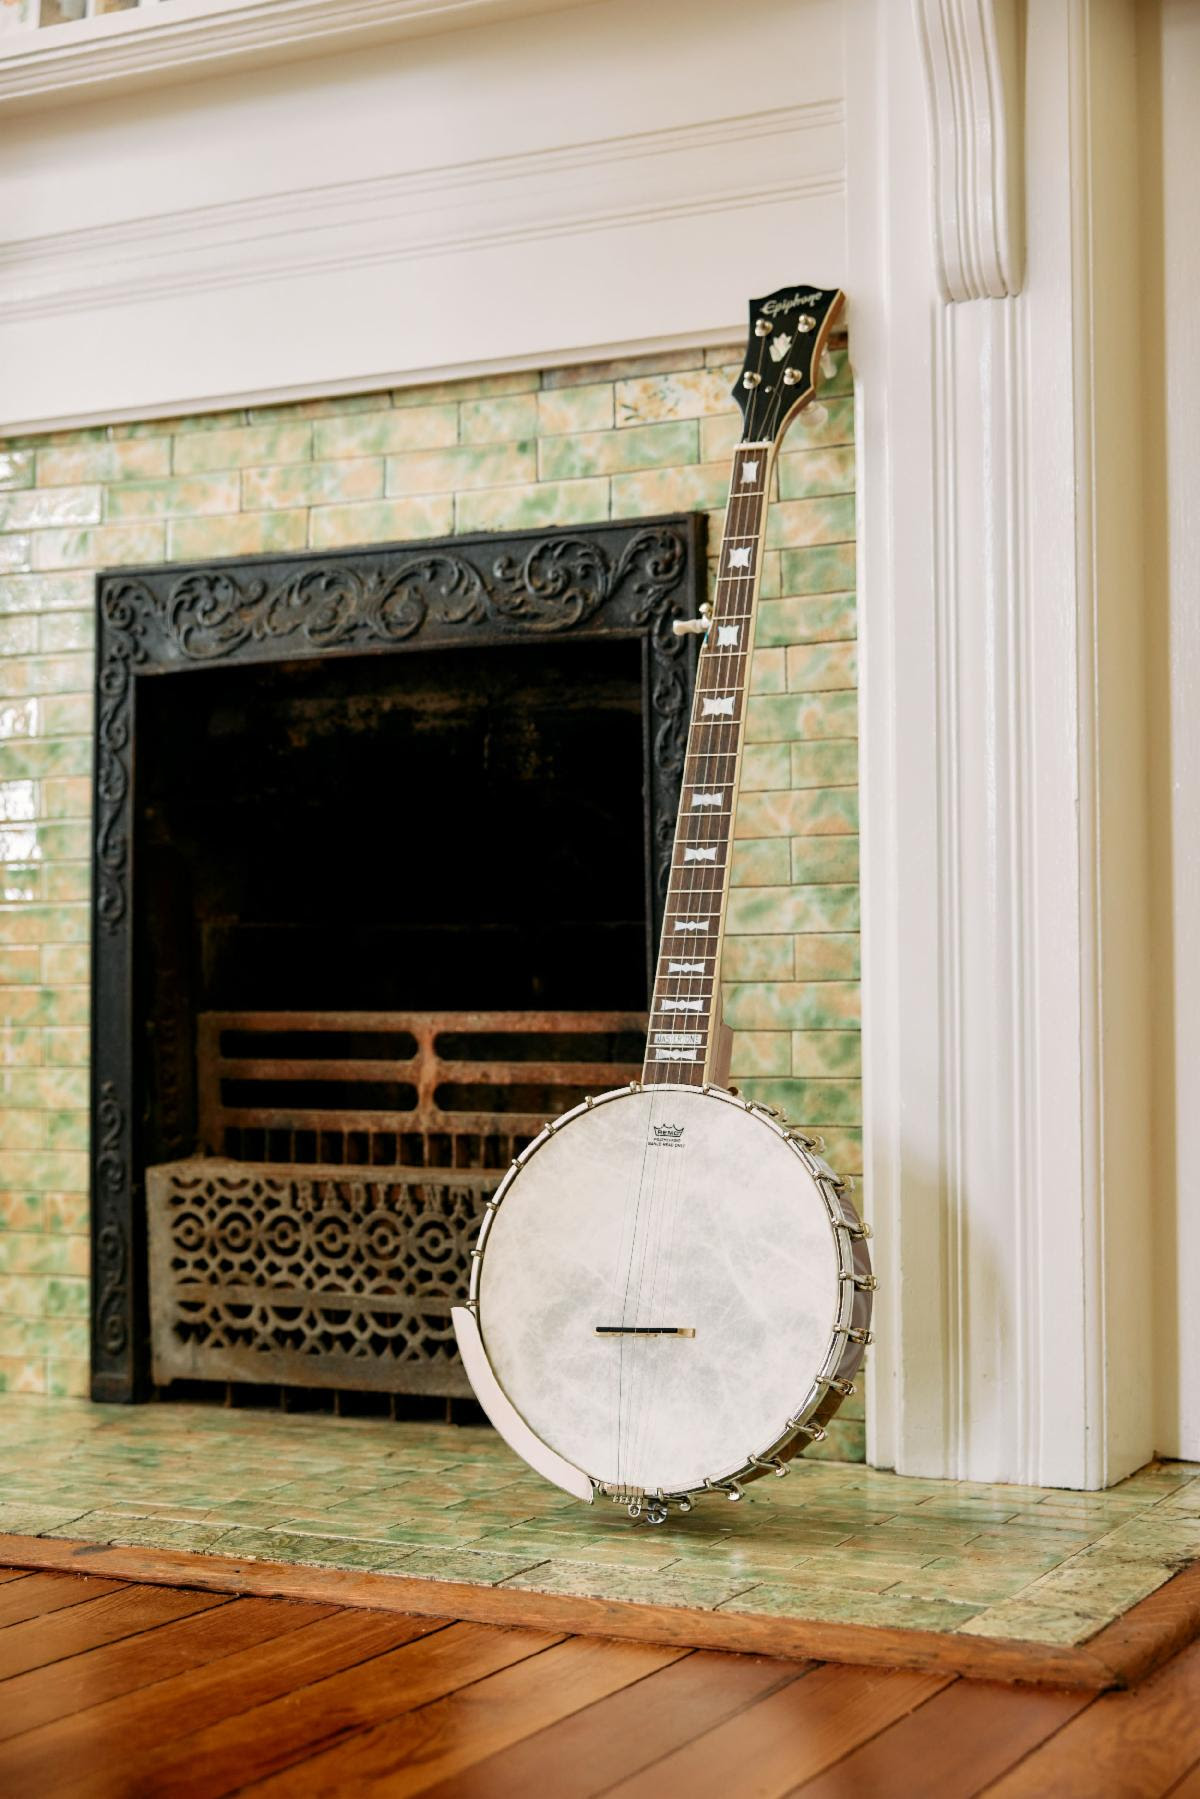 The Epiphone Mastertone Bowtie Open Back Banjo in Natural finish.